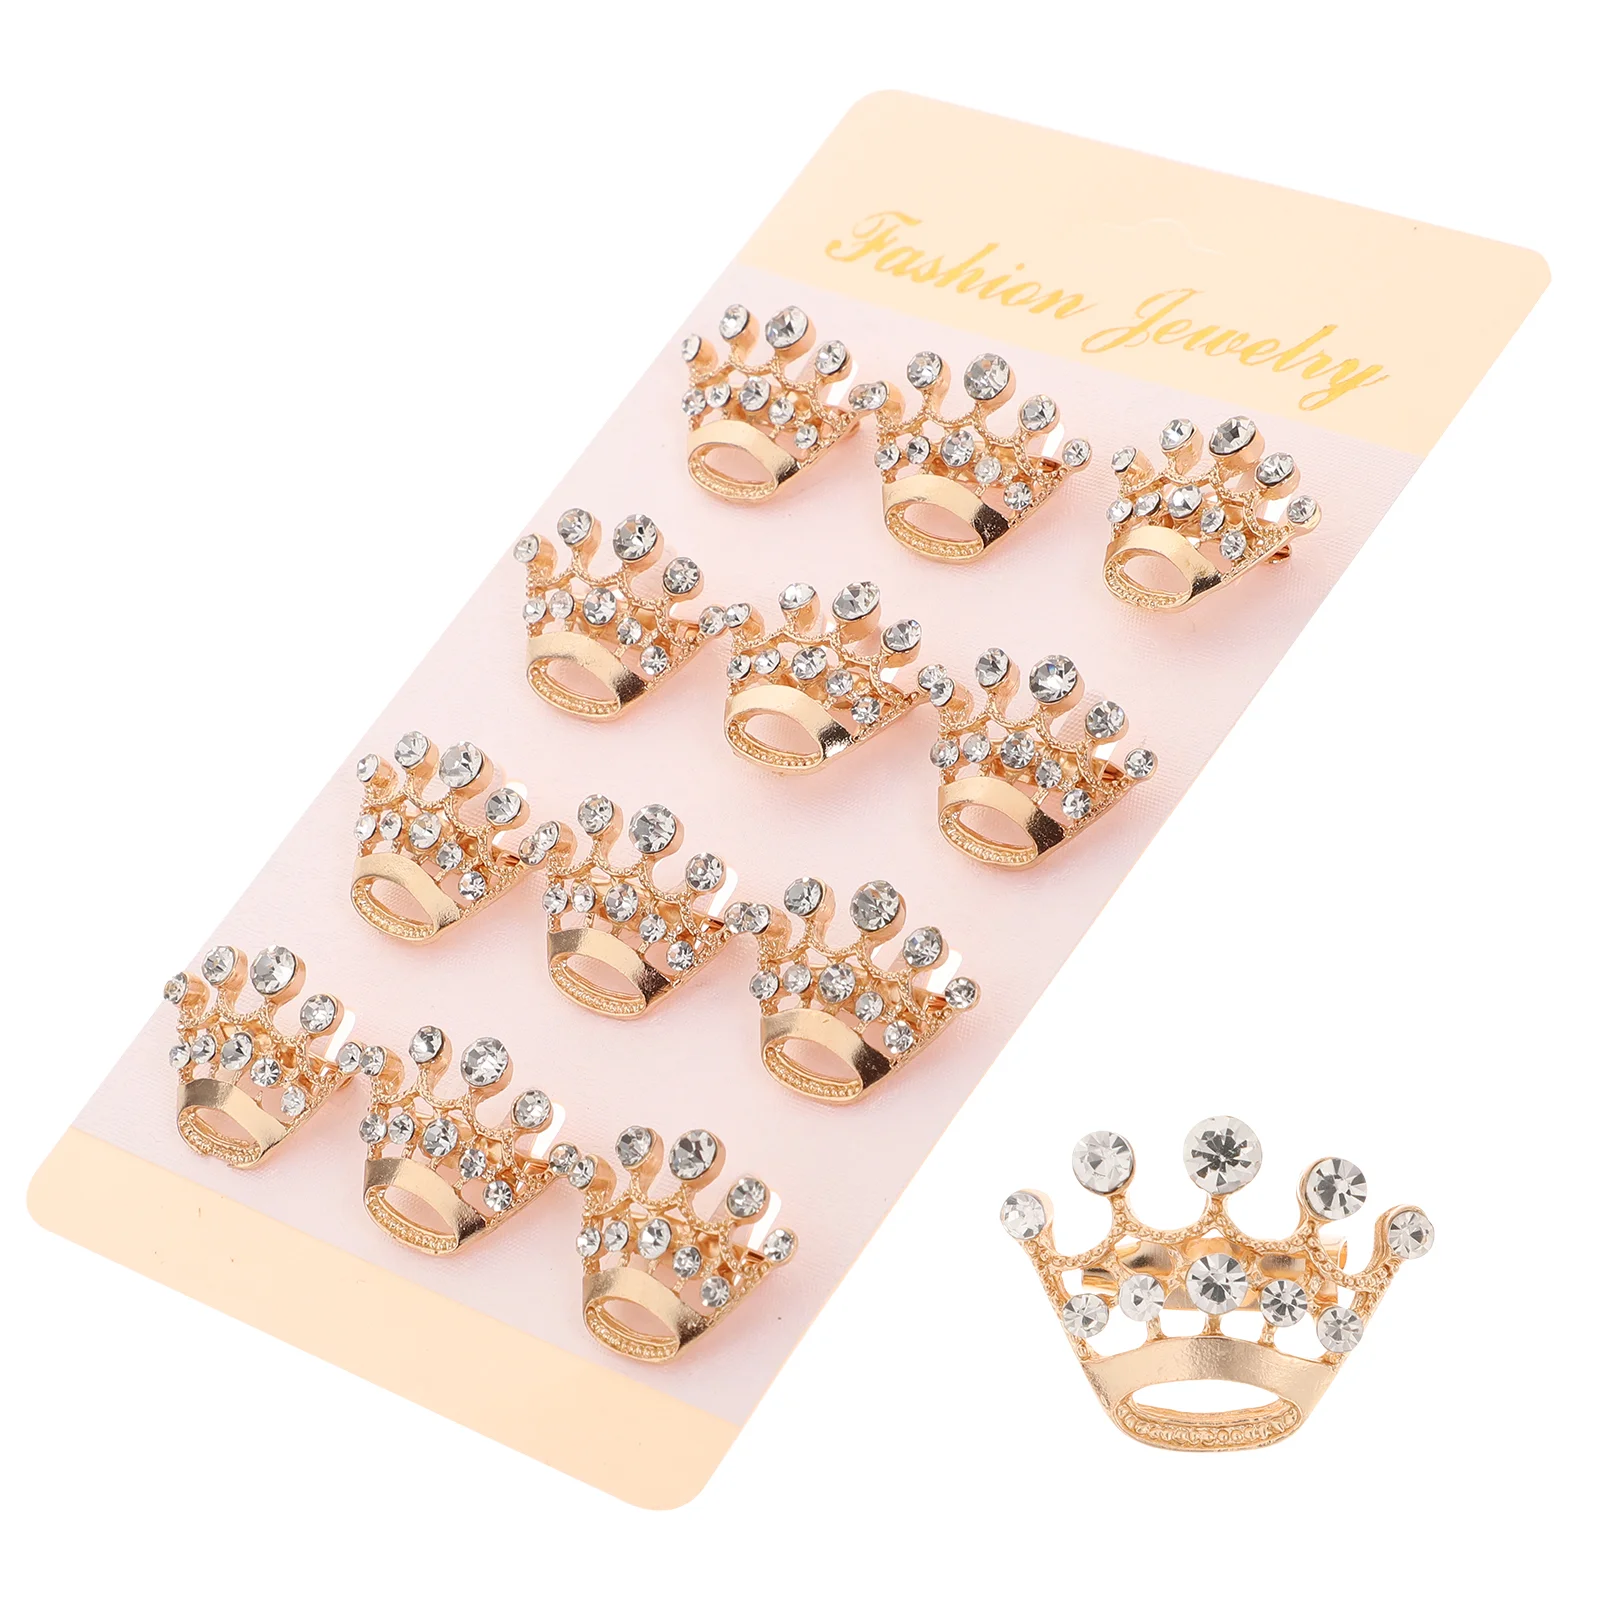 

12pcs Crown And Brooches Crown Brooch Gifts for Diamante Wedding Party Valentines Day Graduation DIY Tiara Crown Corsage Brooch